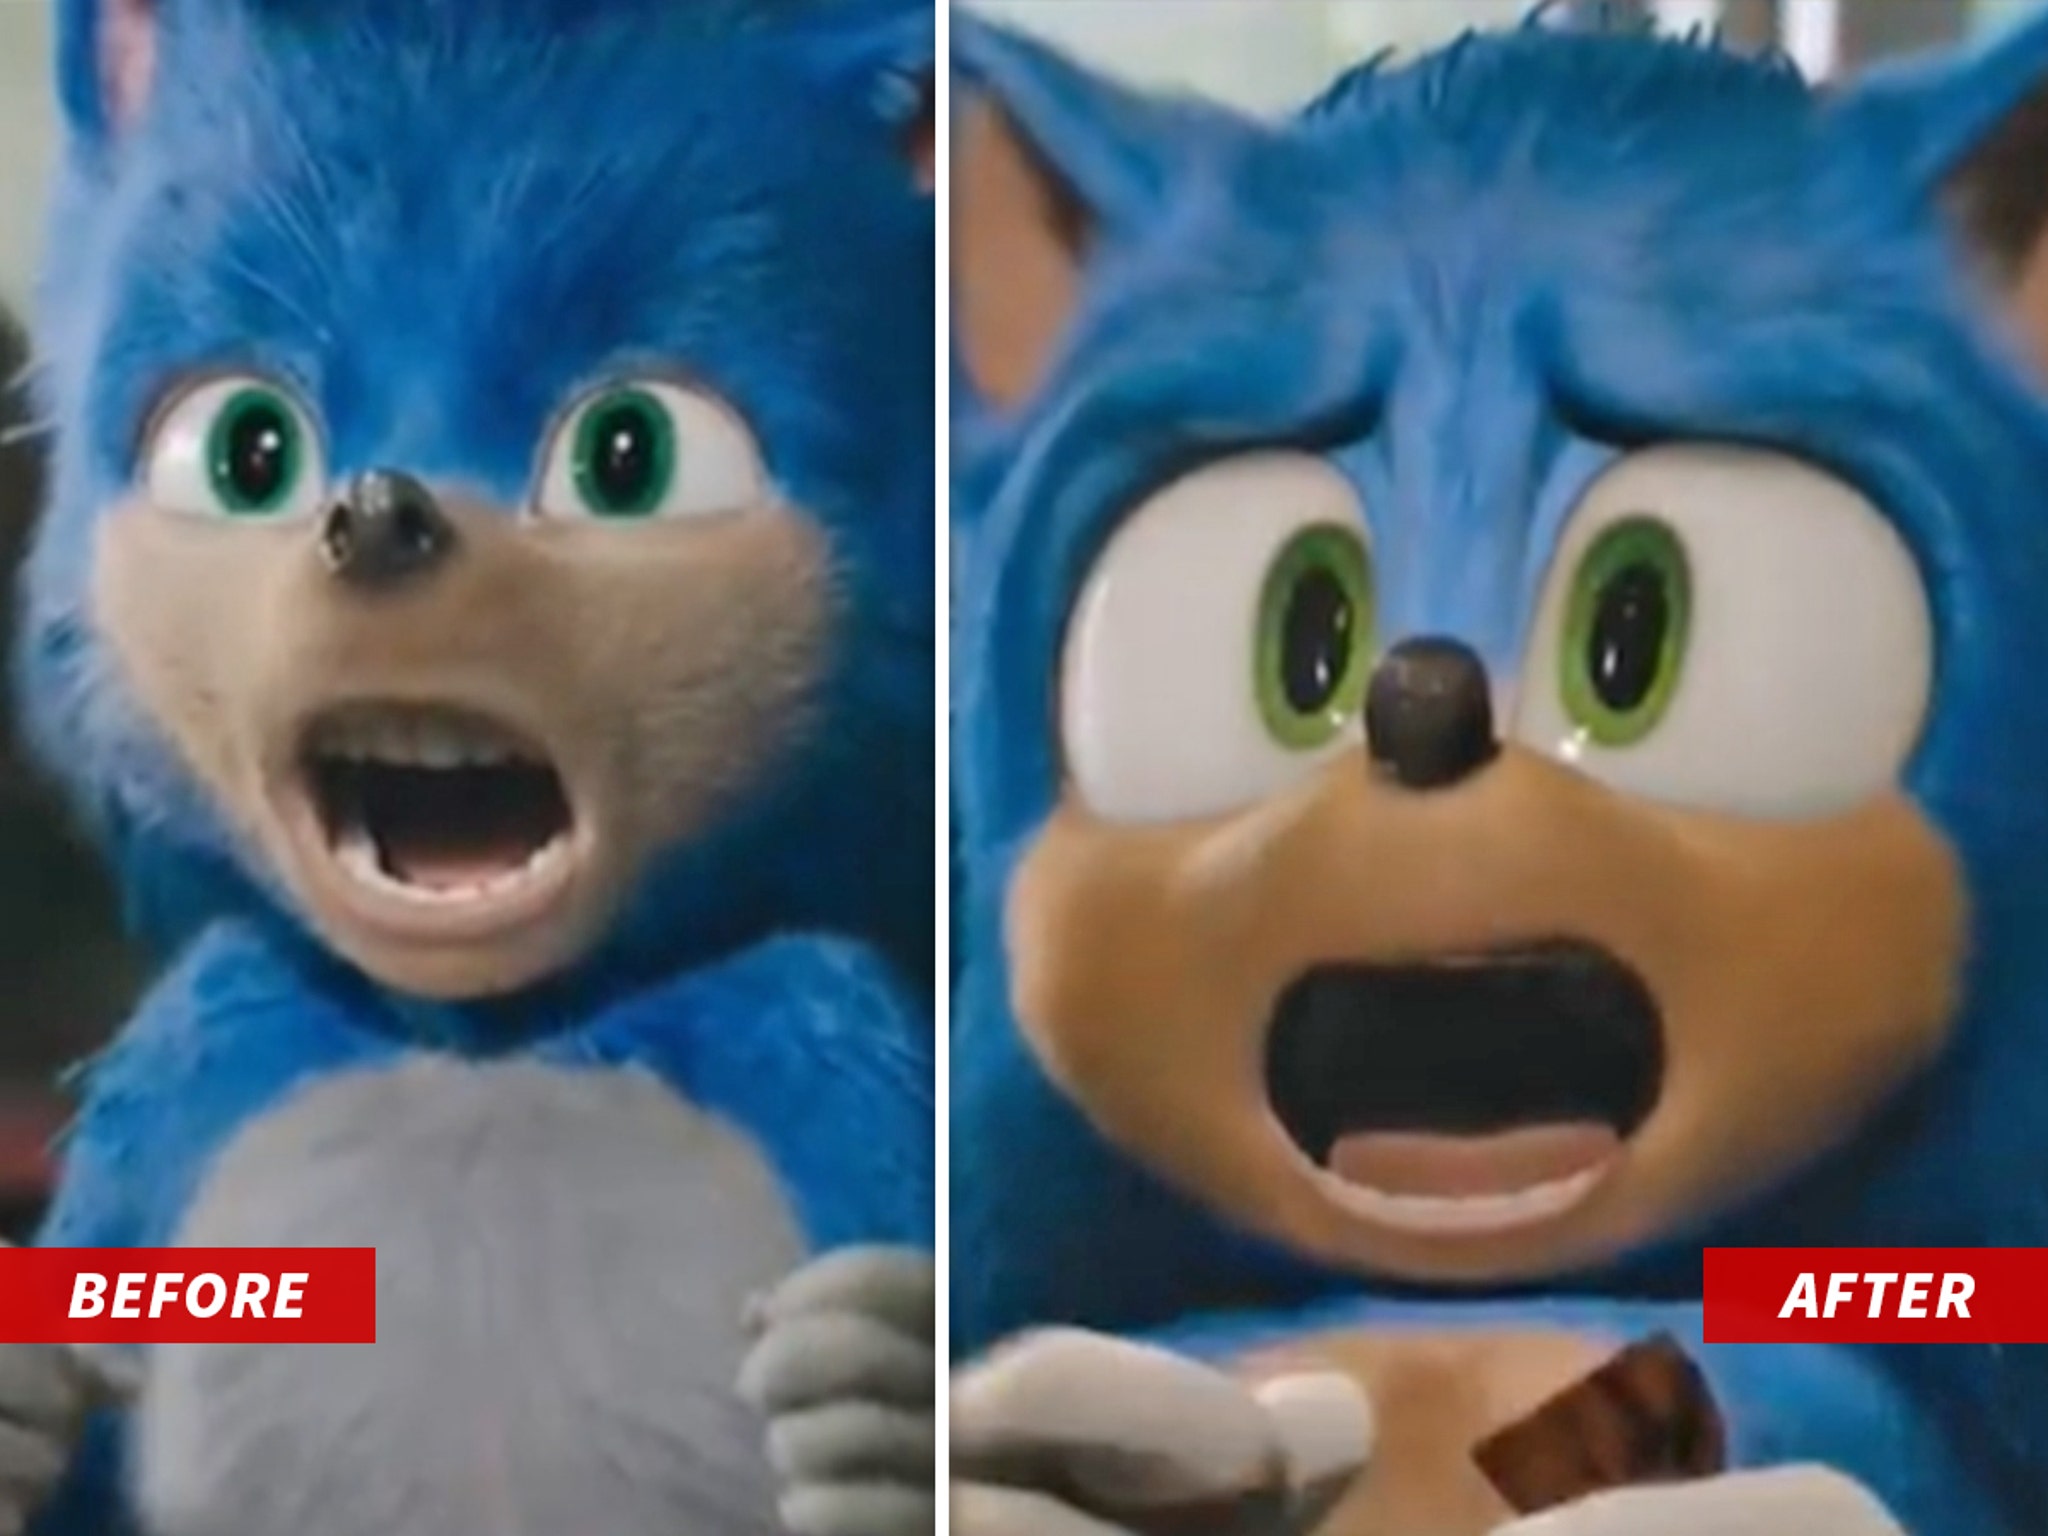 Sonic Movie Redesign Controversy- Sonic the Hedgehog Director Is Changing  the Character After Fan Outrage